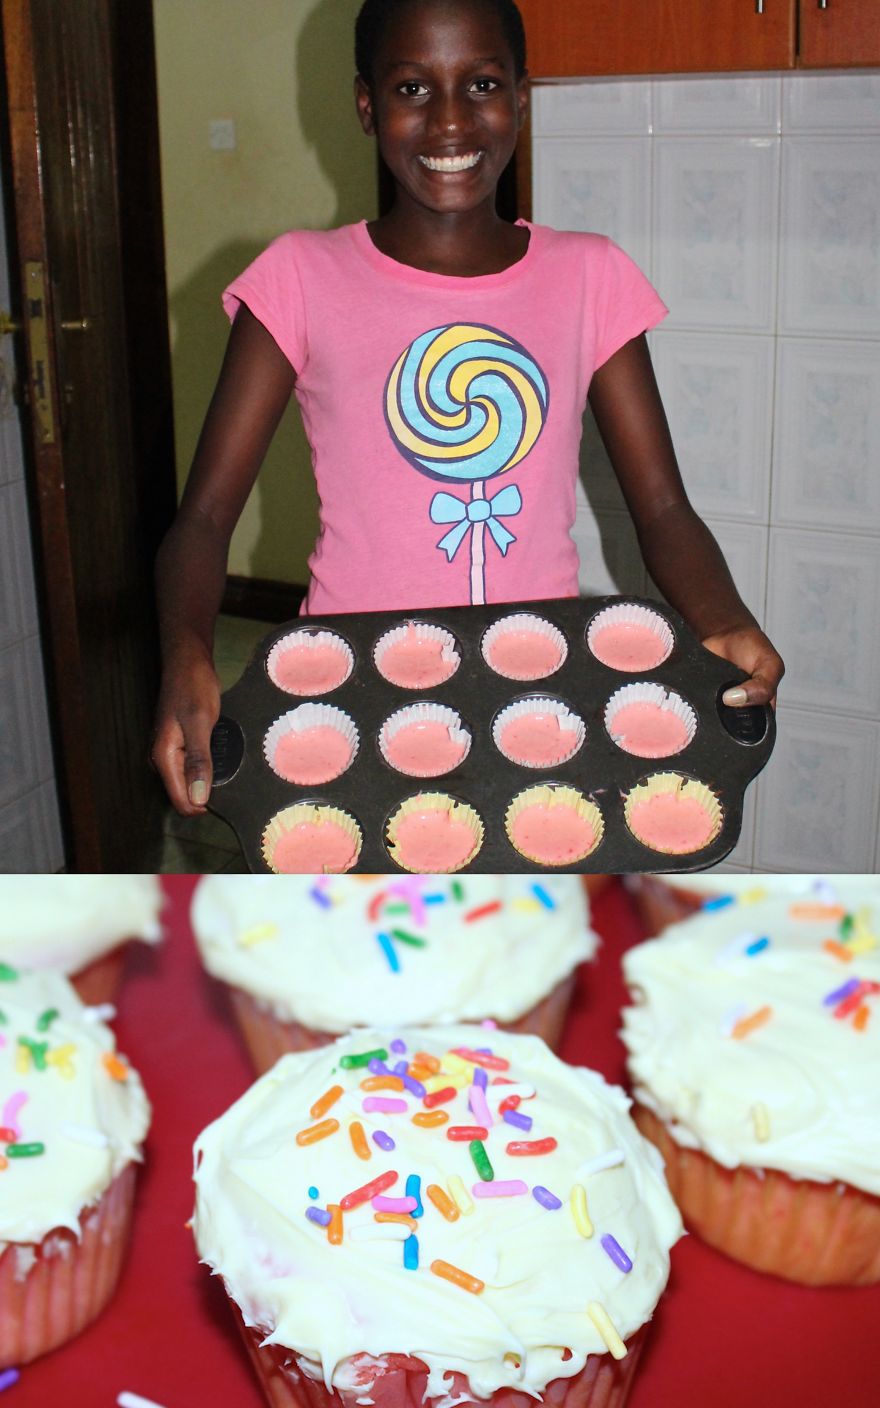 Cupcakes For Wheels - Help These Children Buy A Vehicle For Their Family & Ministry In Uganda